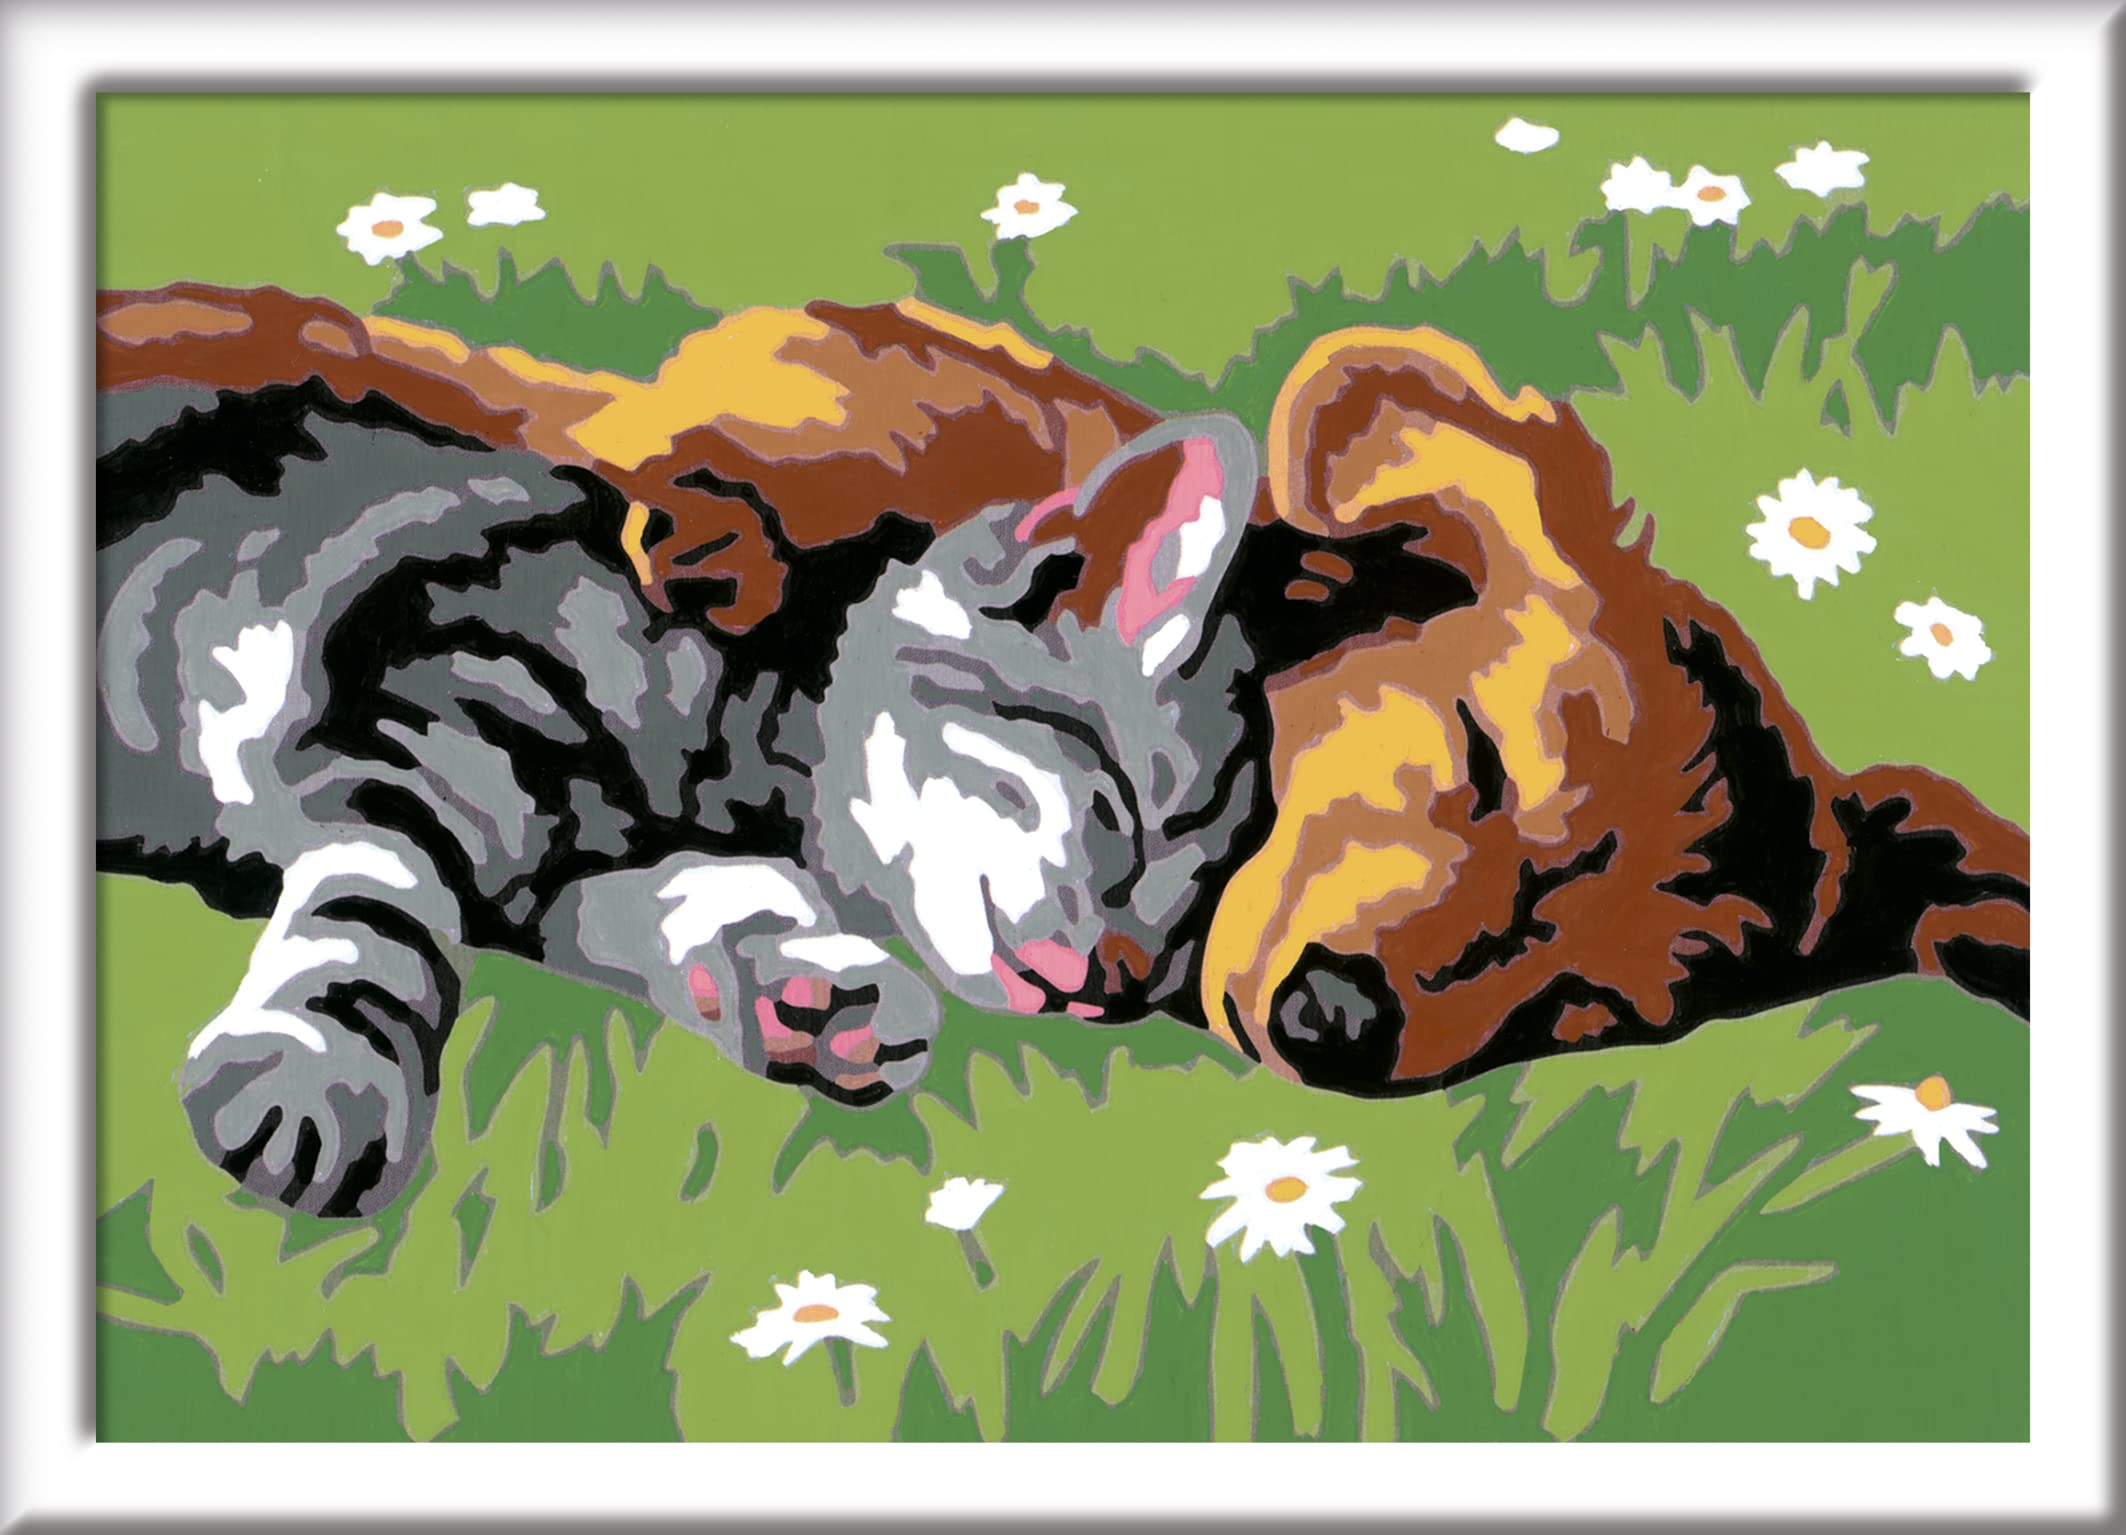 Ravensburger CreArt Sleeping Cat & Dog Paint by Numbers Kit for Kids - Painting Arts and Crafts for Ages 7 and Up